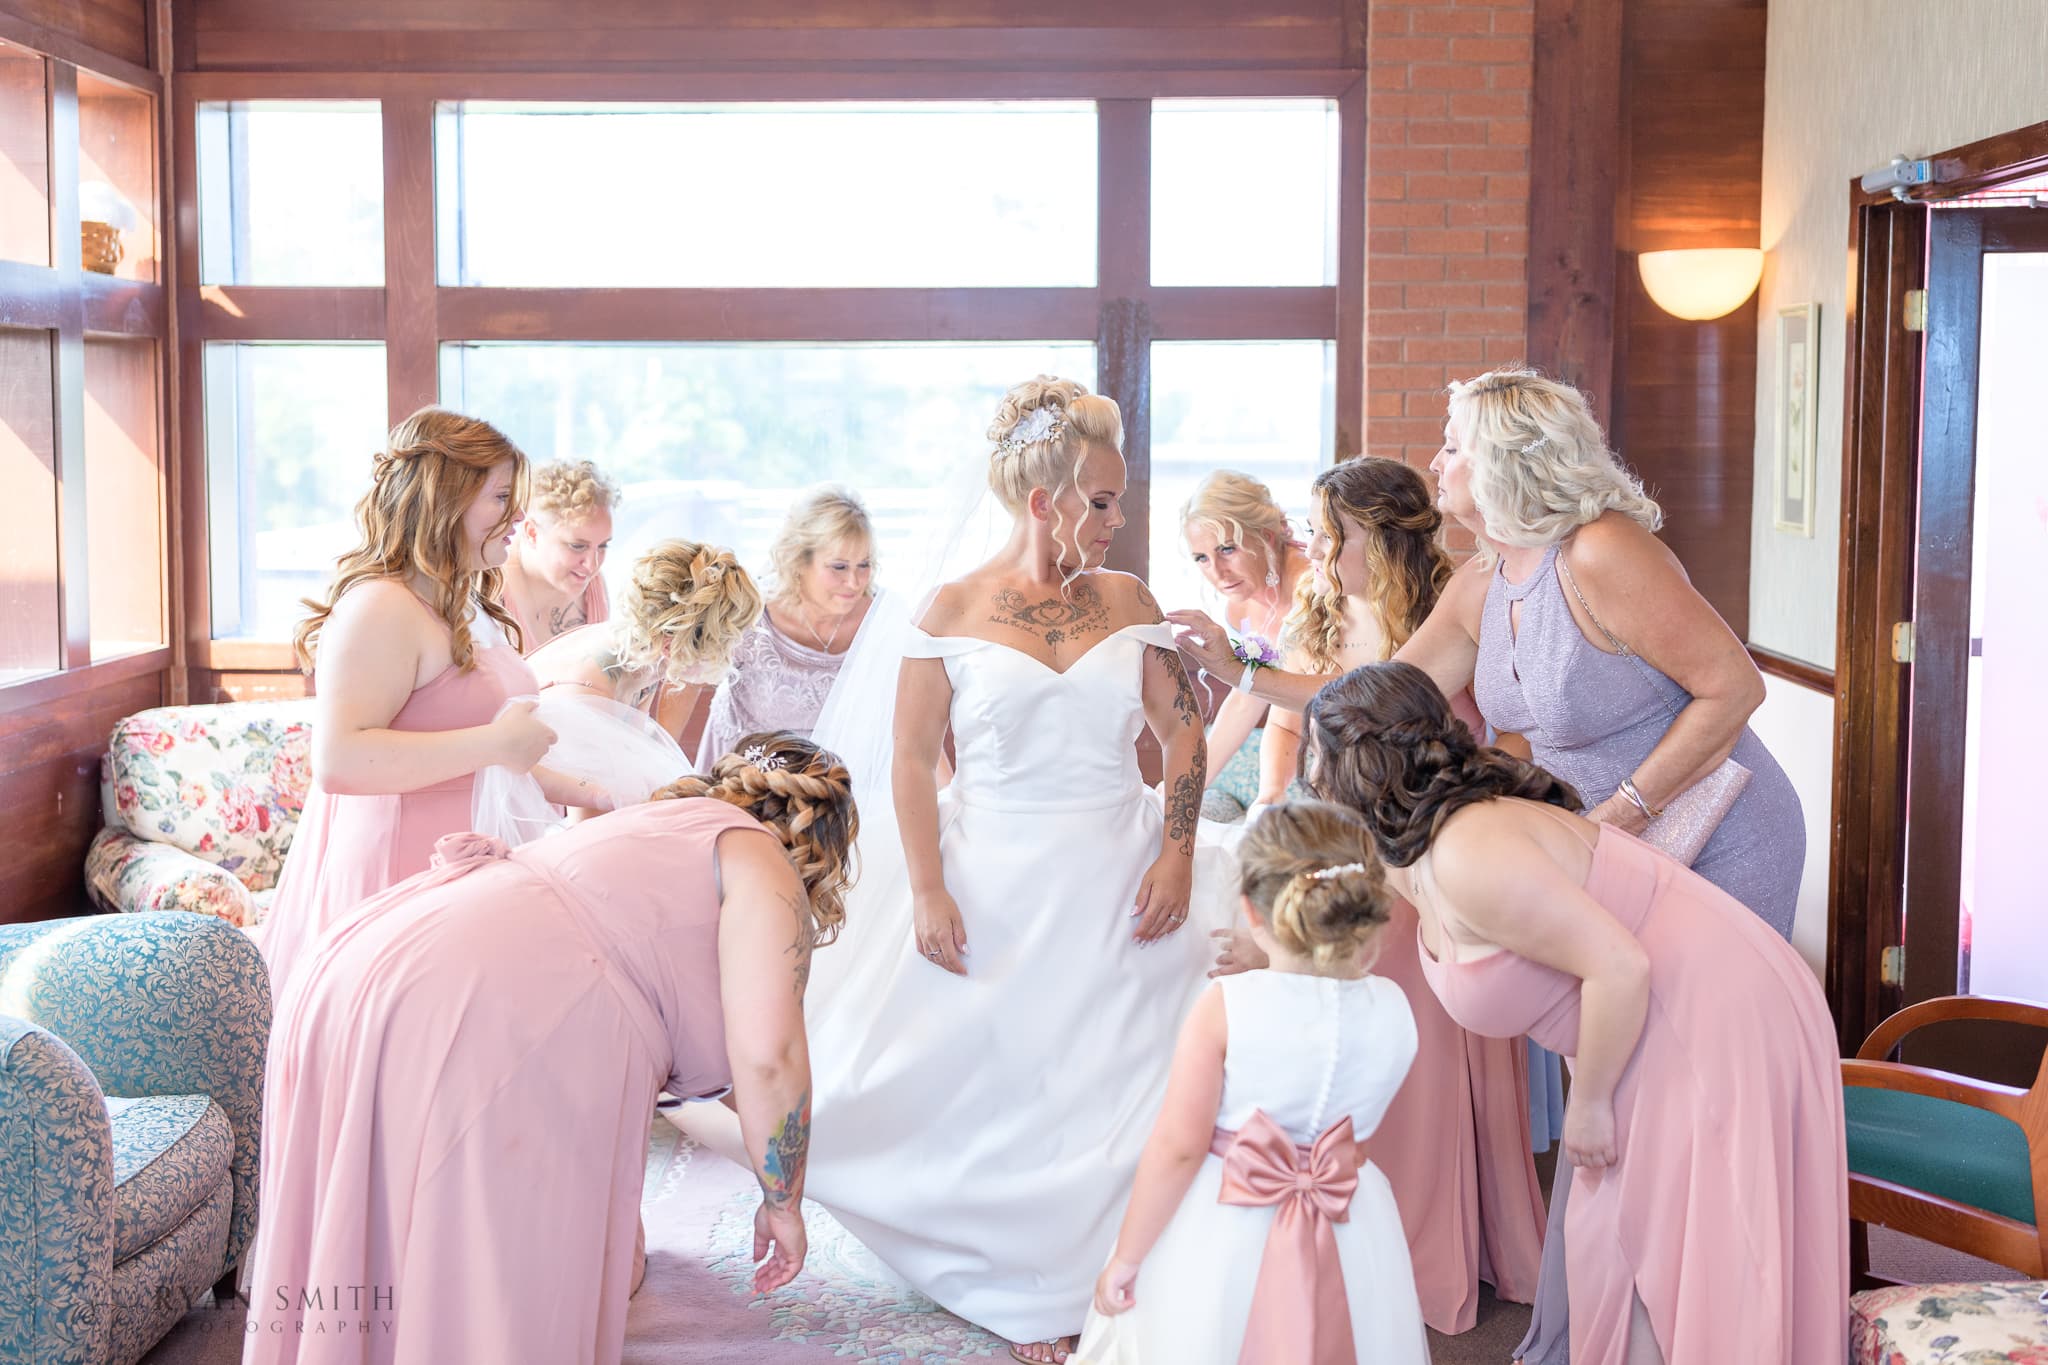 Helping bride into her dress - Wild Wing Plantation